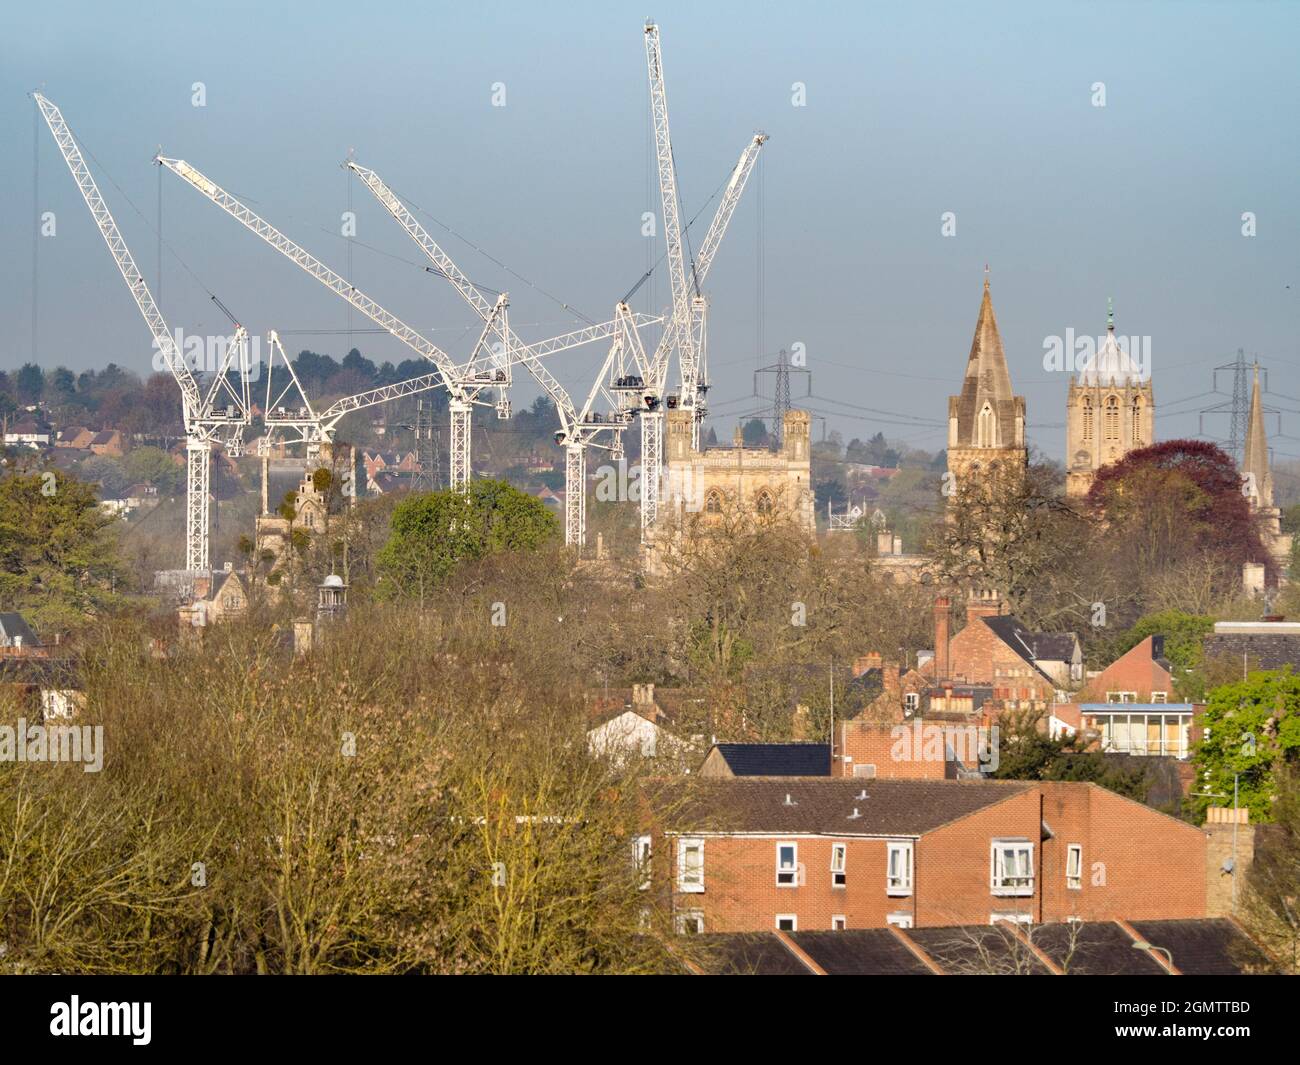 These mammoth cranes are all at work on Oxford's giant Westgate development project. Delayed for many years by the financial recession, it is now fina Stock Photo